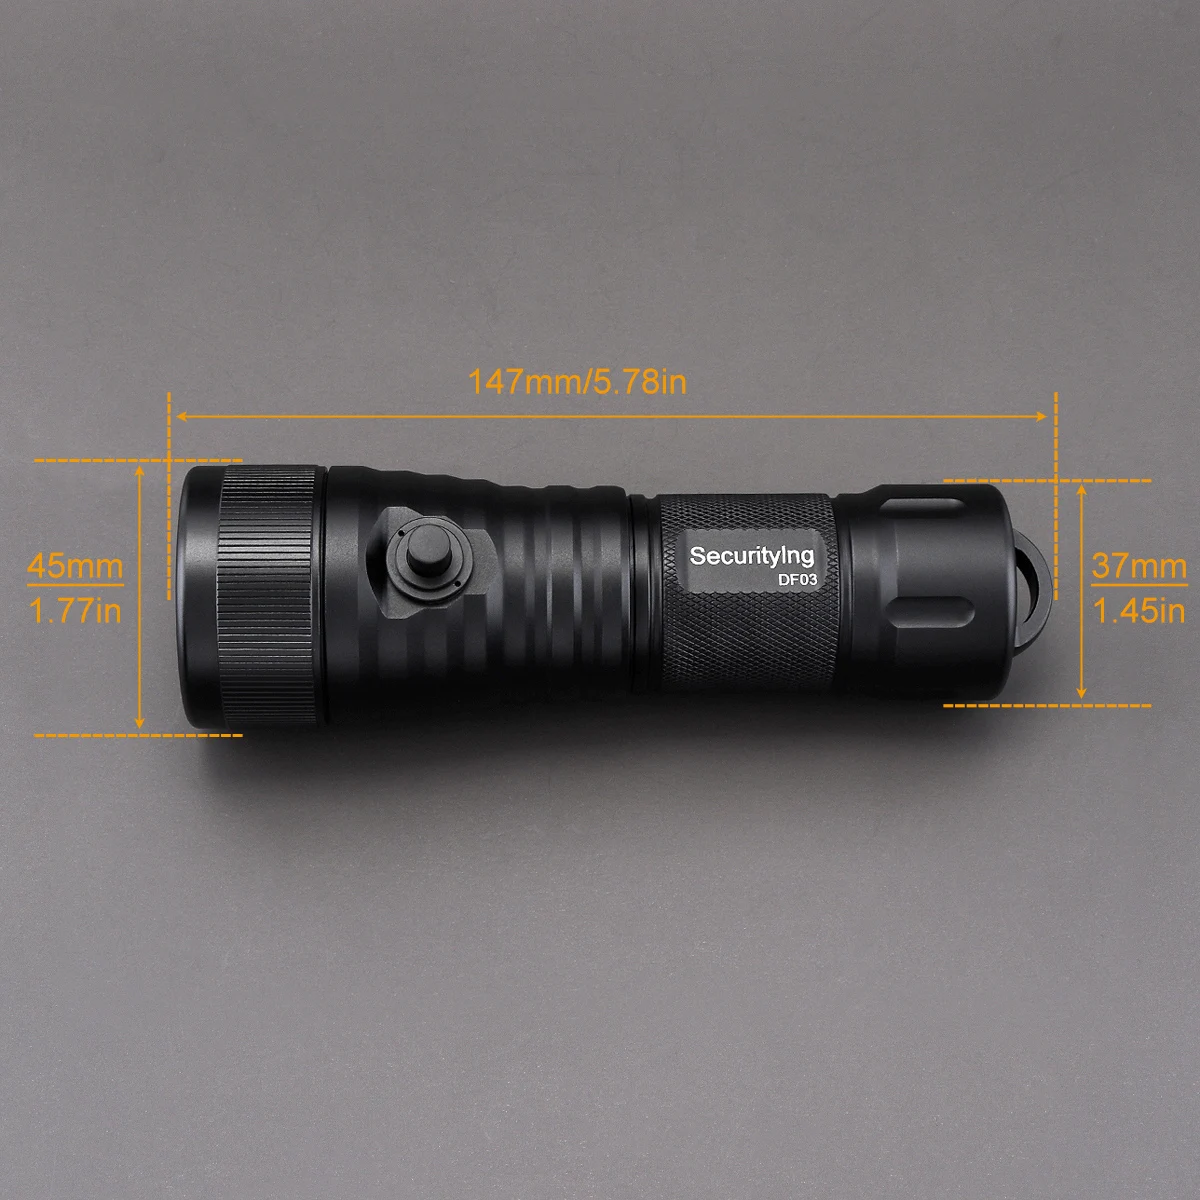 SecurityIng 3000 Lumen Diving Flashlight SST70 LED  Underwater 150M with 9 Degrees Narrow Beam IP68 Waterproof Scuba Dive Torch enlarge